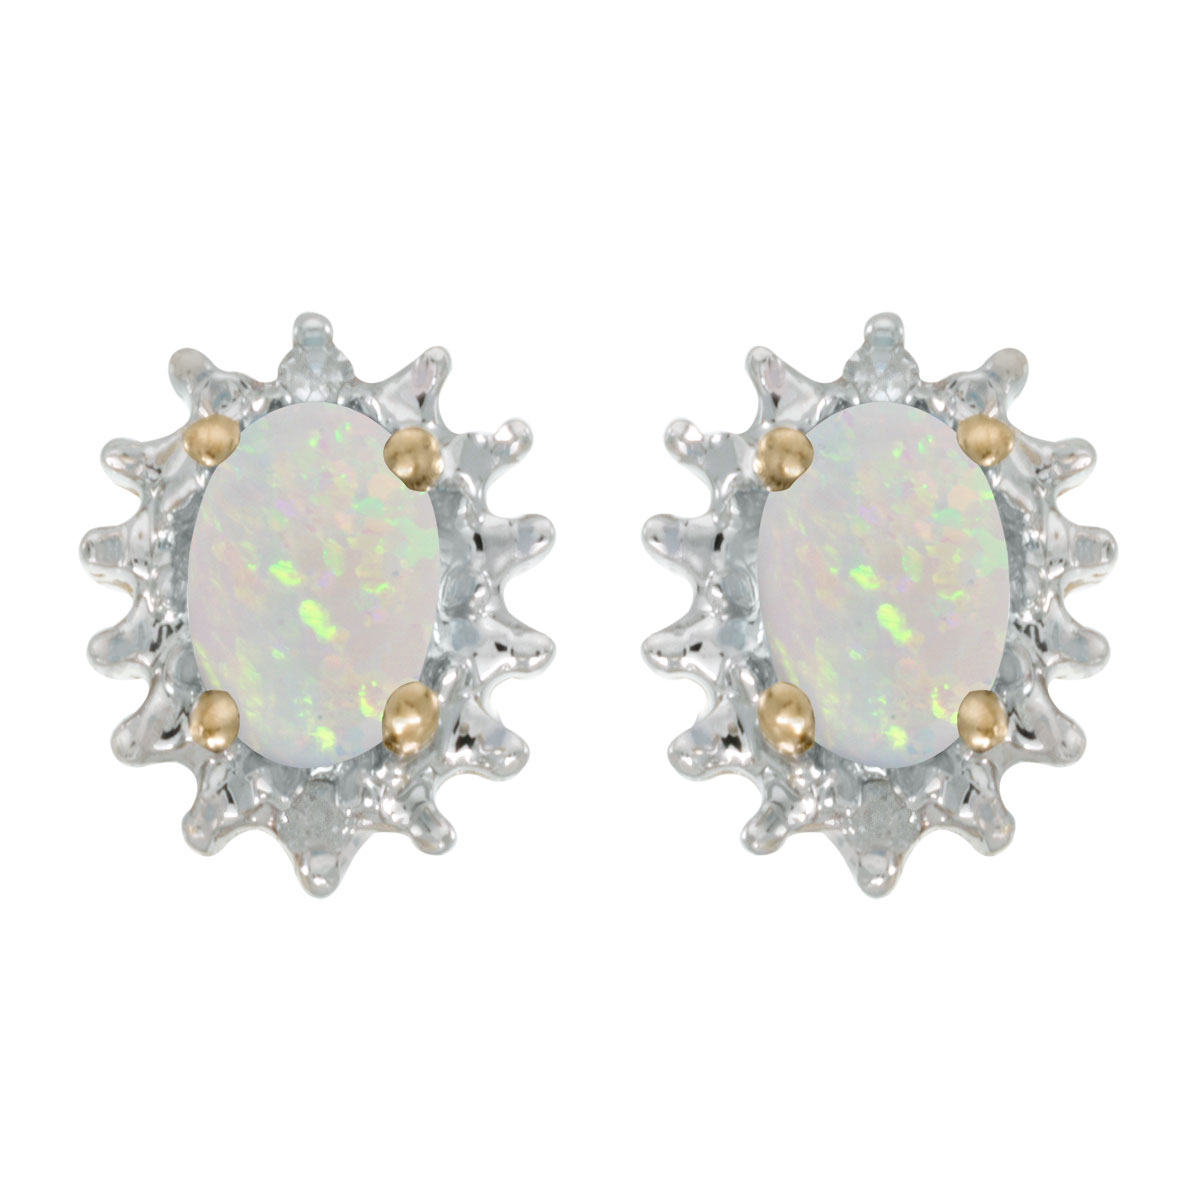 JCX1997: These 14k yellow gold oval opal and diamond earrings feature 6x4 mm genuine natural opals with a 0.38 ct total weight and .04 ct diamonds.